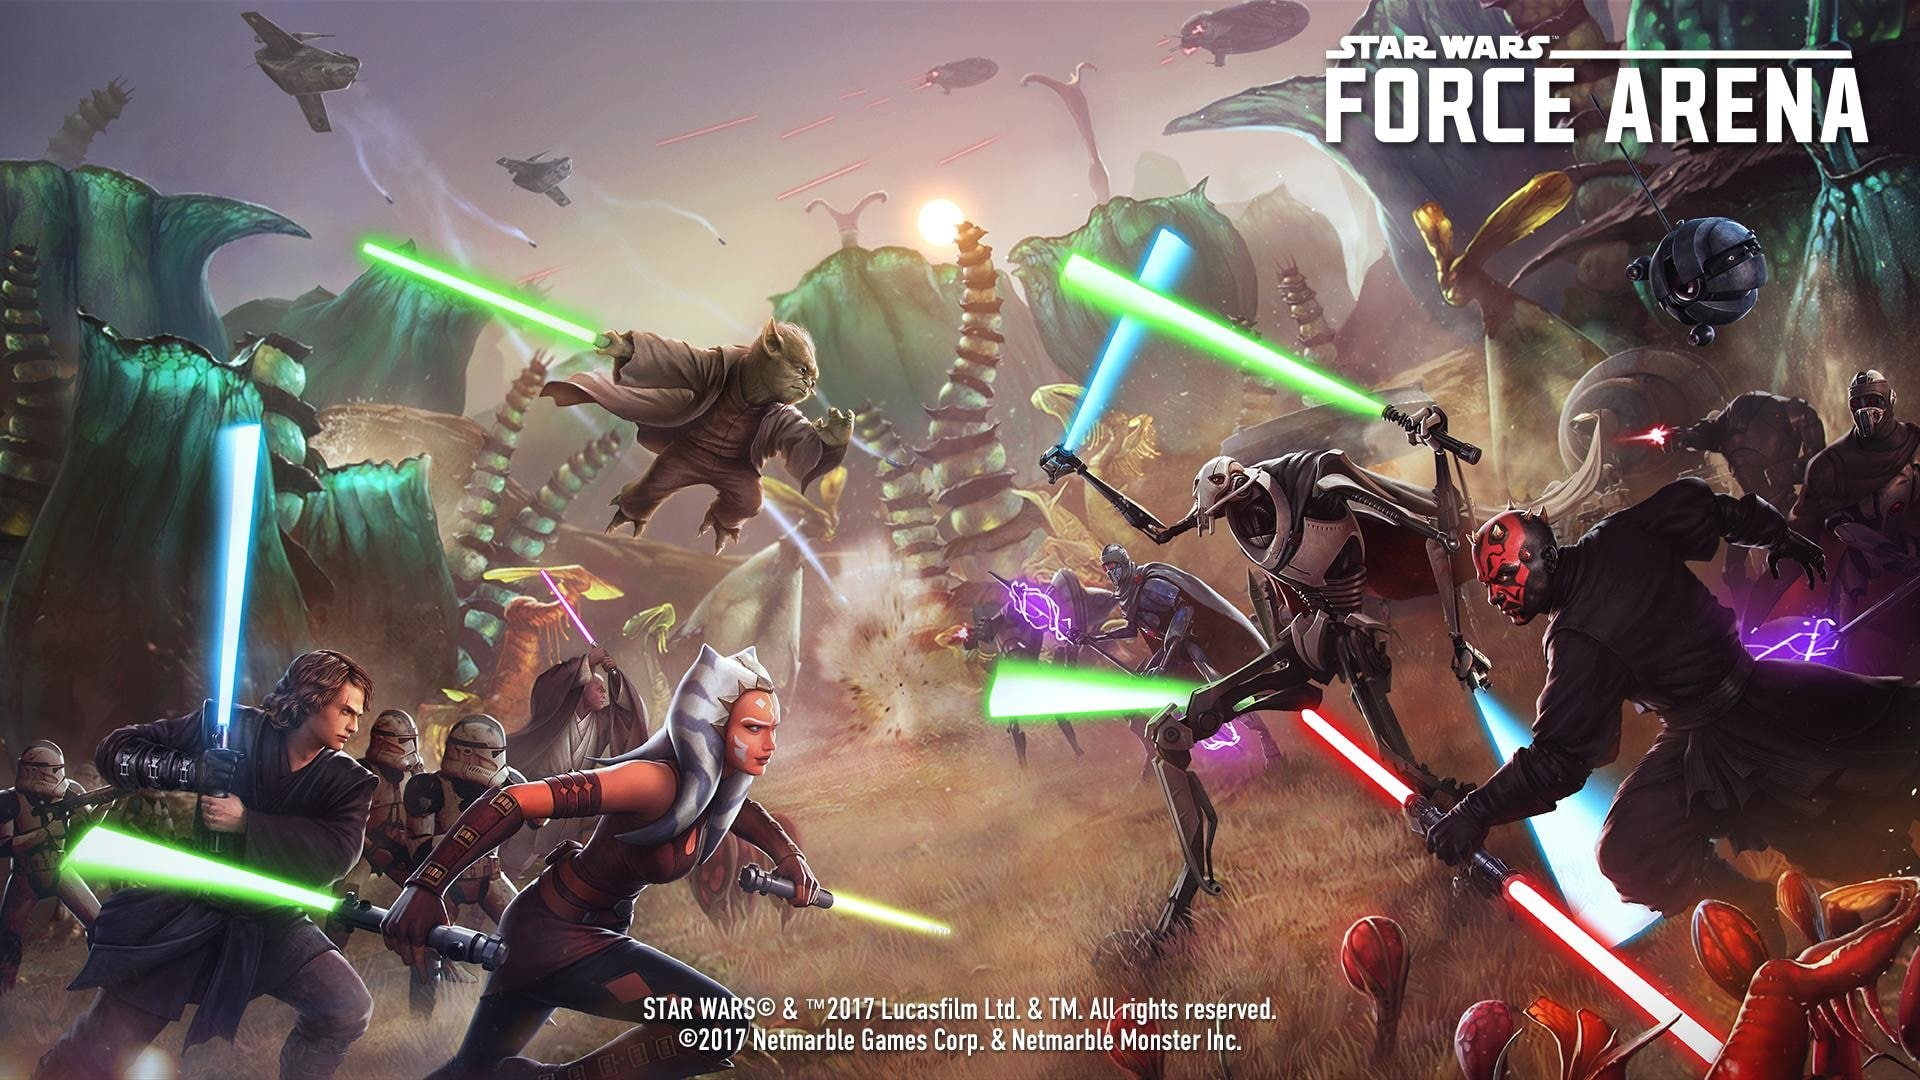 Video Game, Star Wars - Star Wars Force Arena , HD Wallpaper & Backgrounds